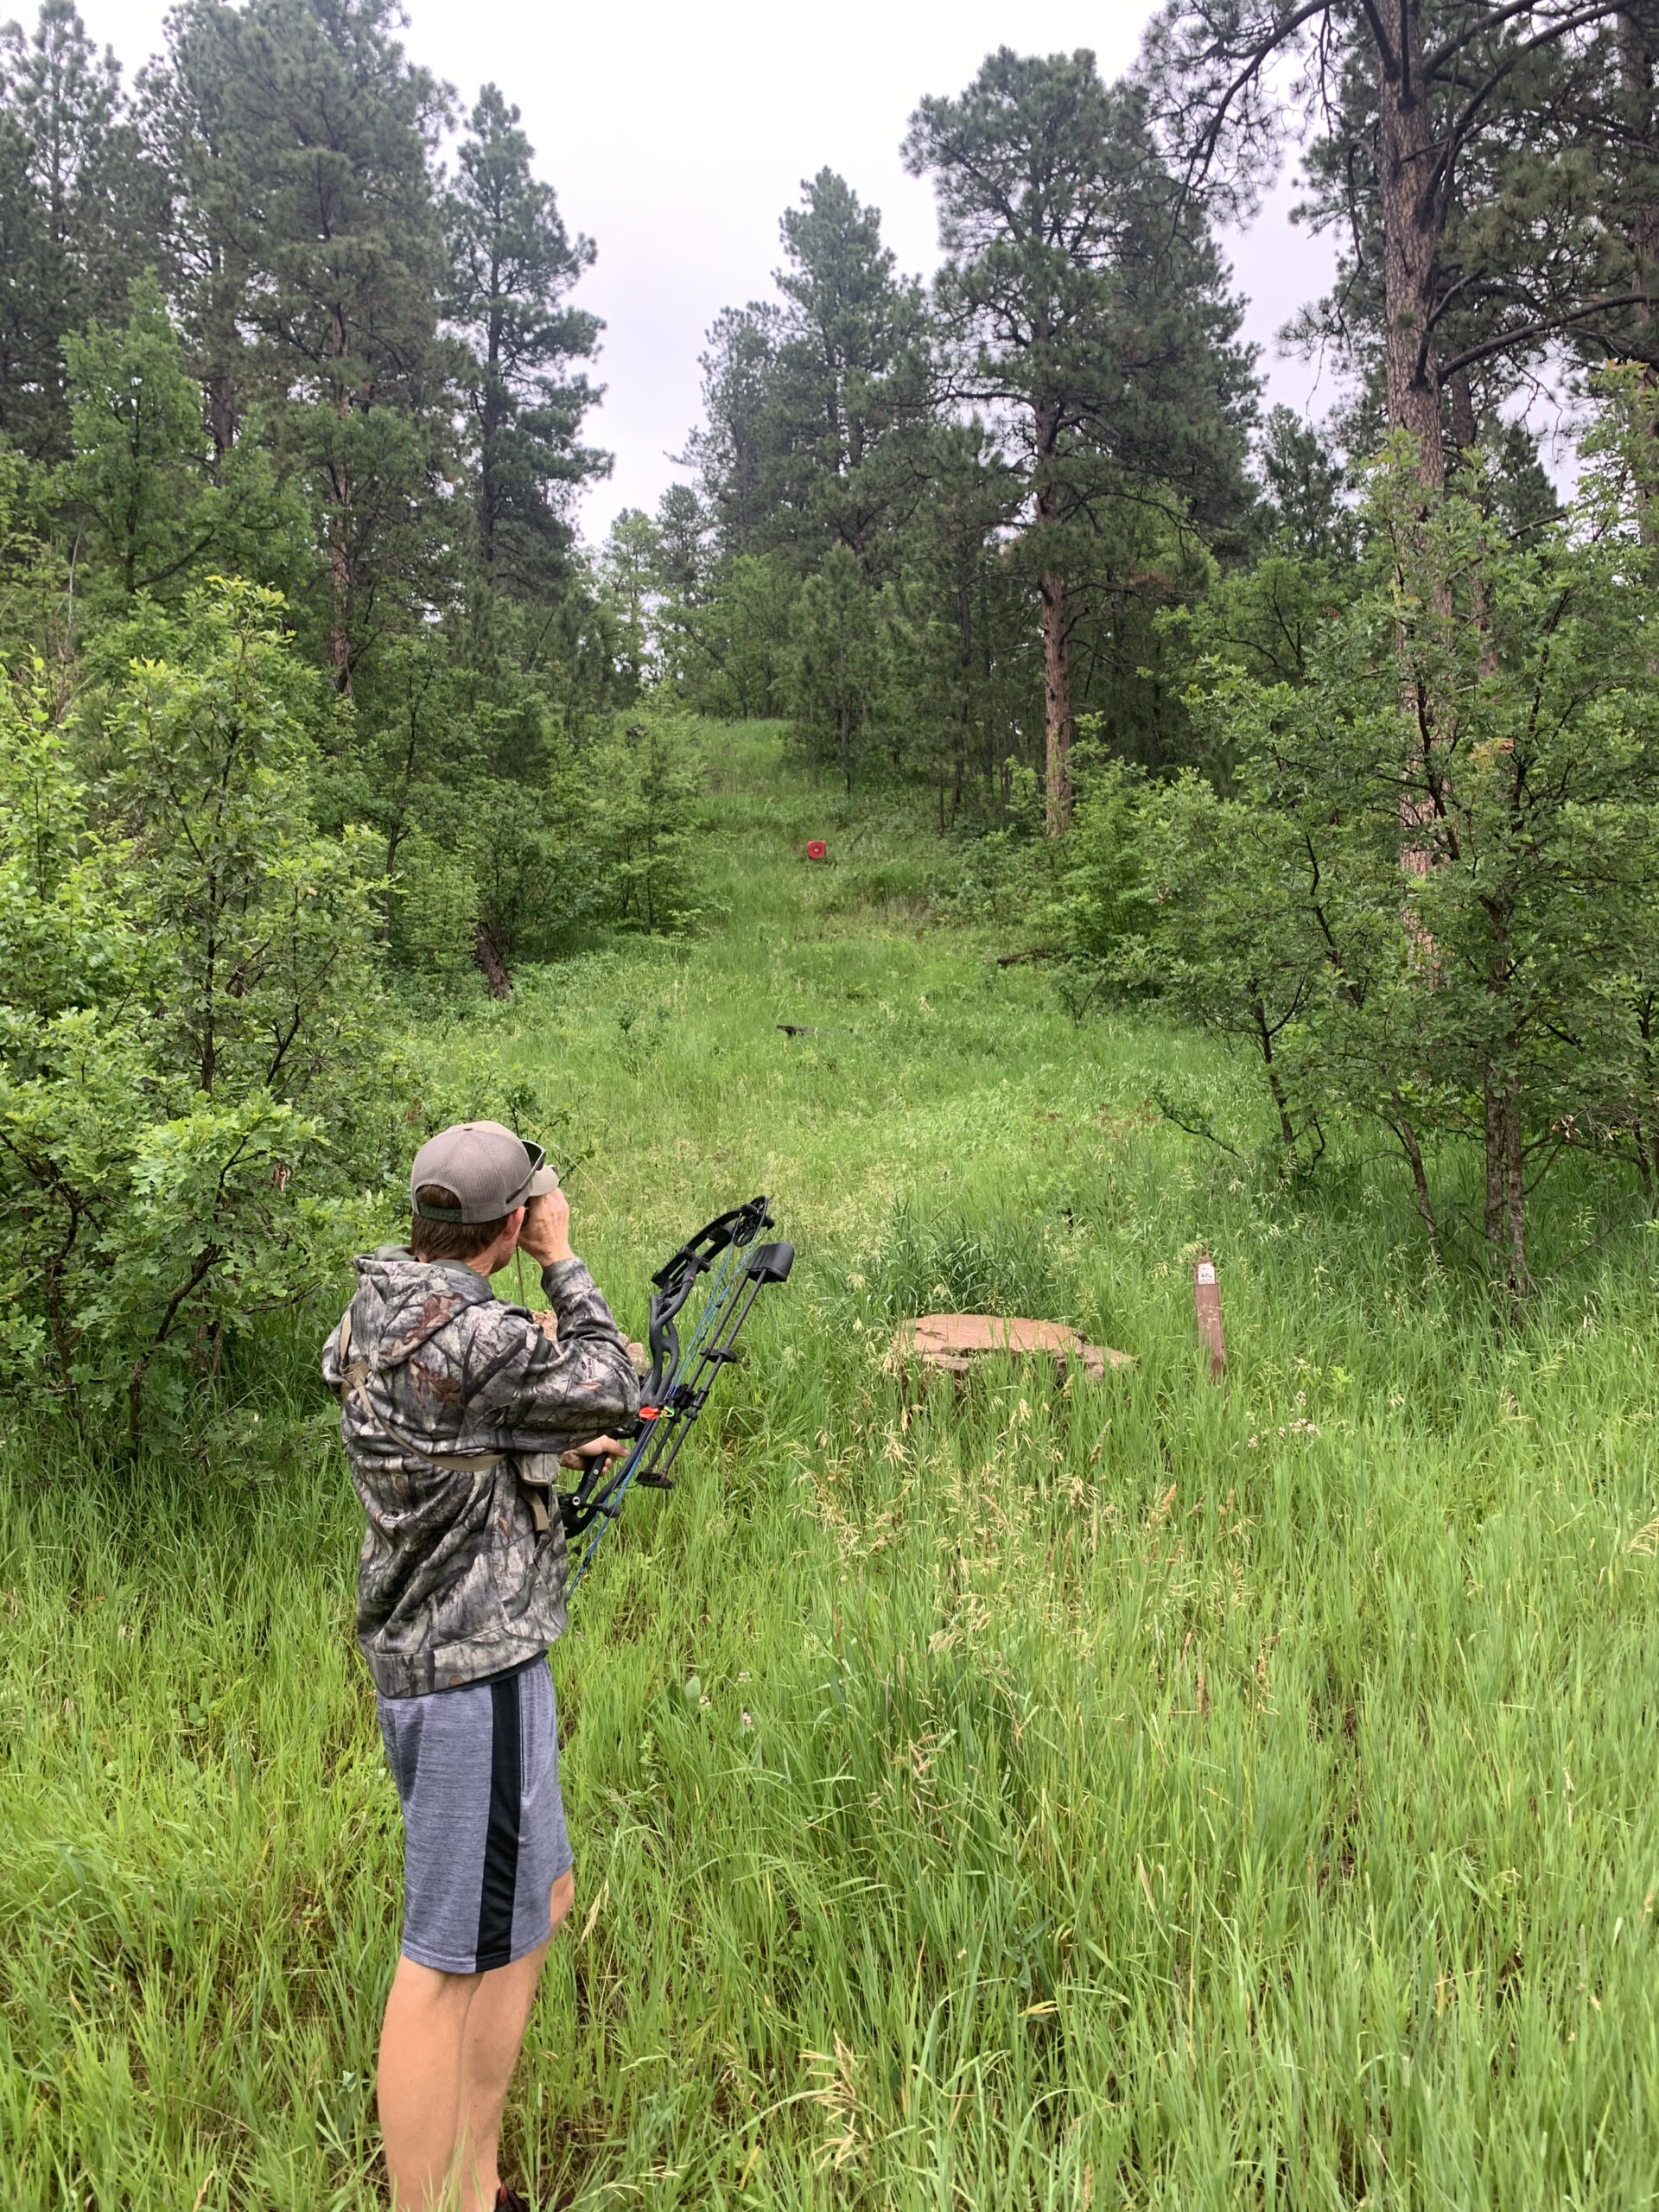 Ranging steep angles is important for bowhunting in steep country